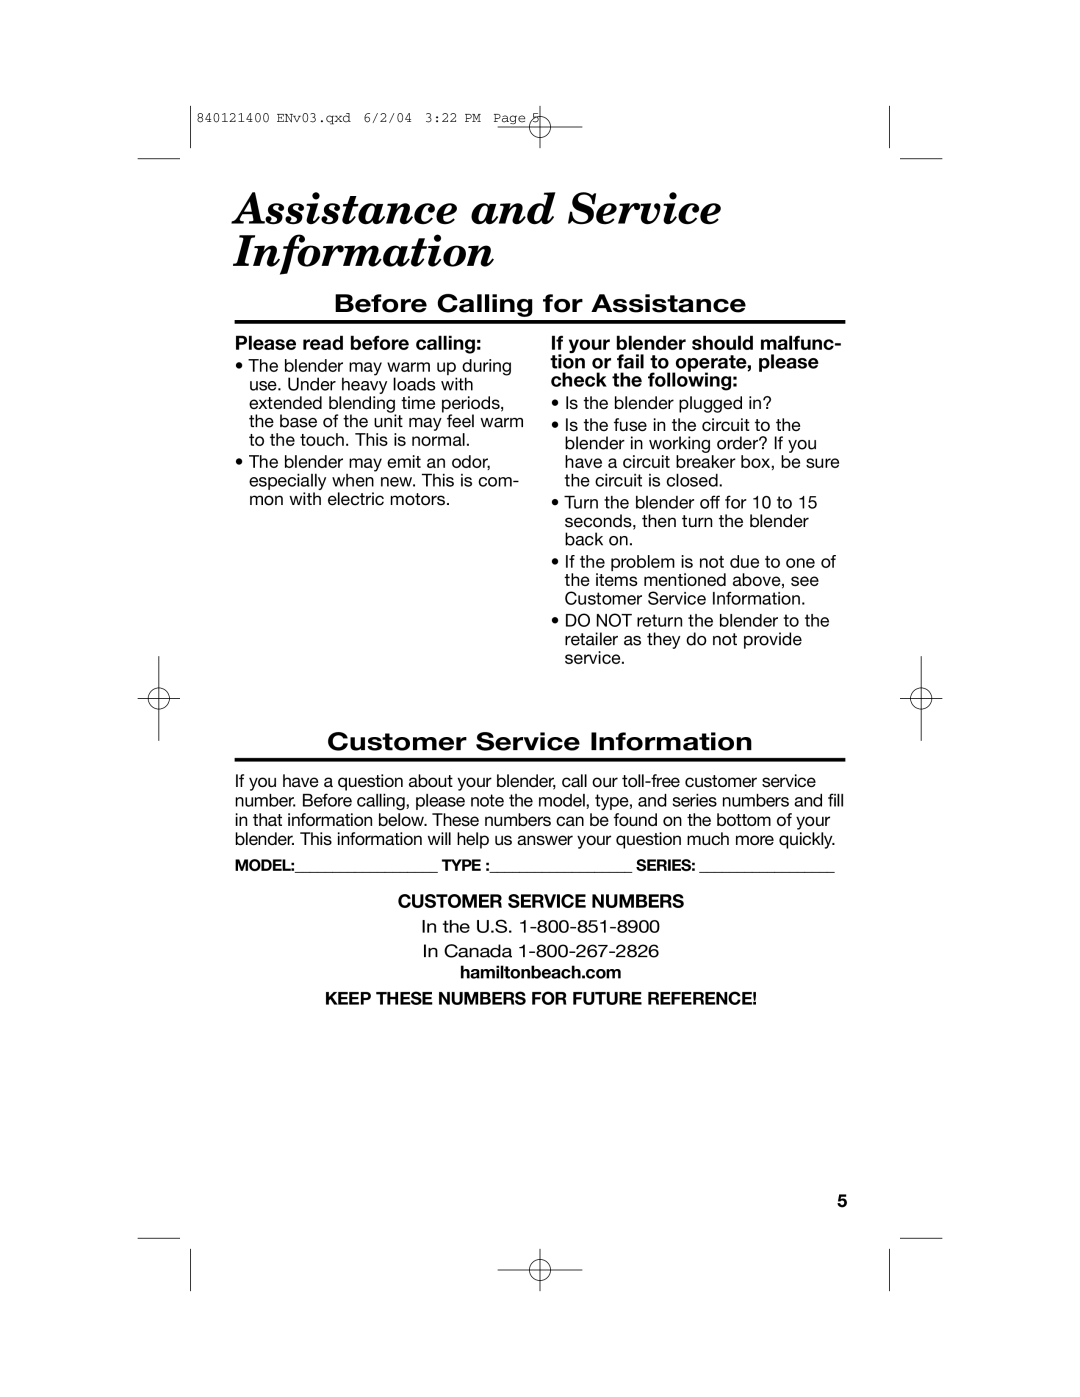 Hamilton Beach All-Metal Blender manual Assistance and Service Information, Before Calling for Assistance 